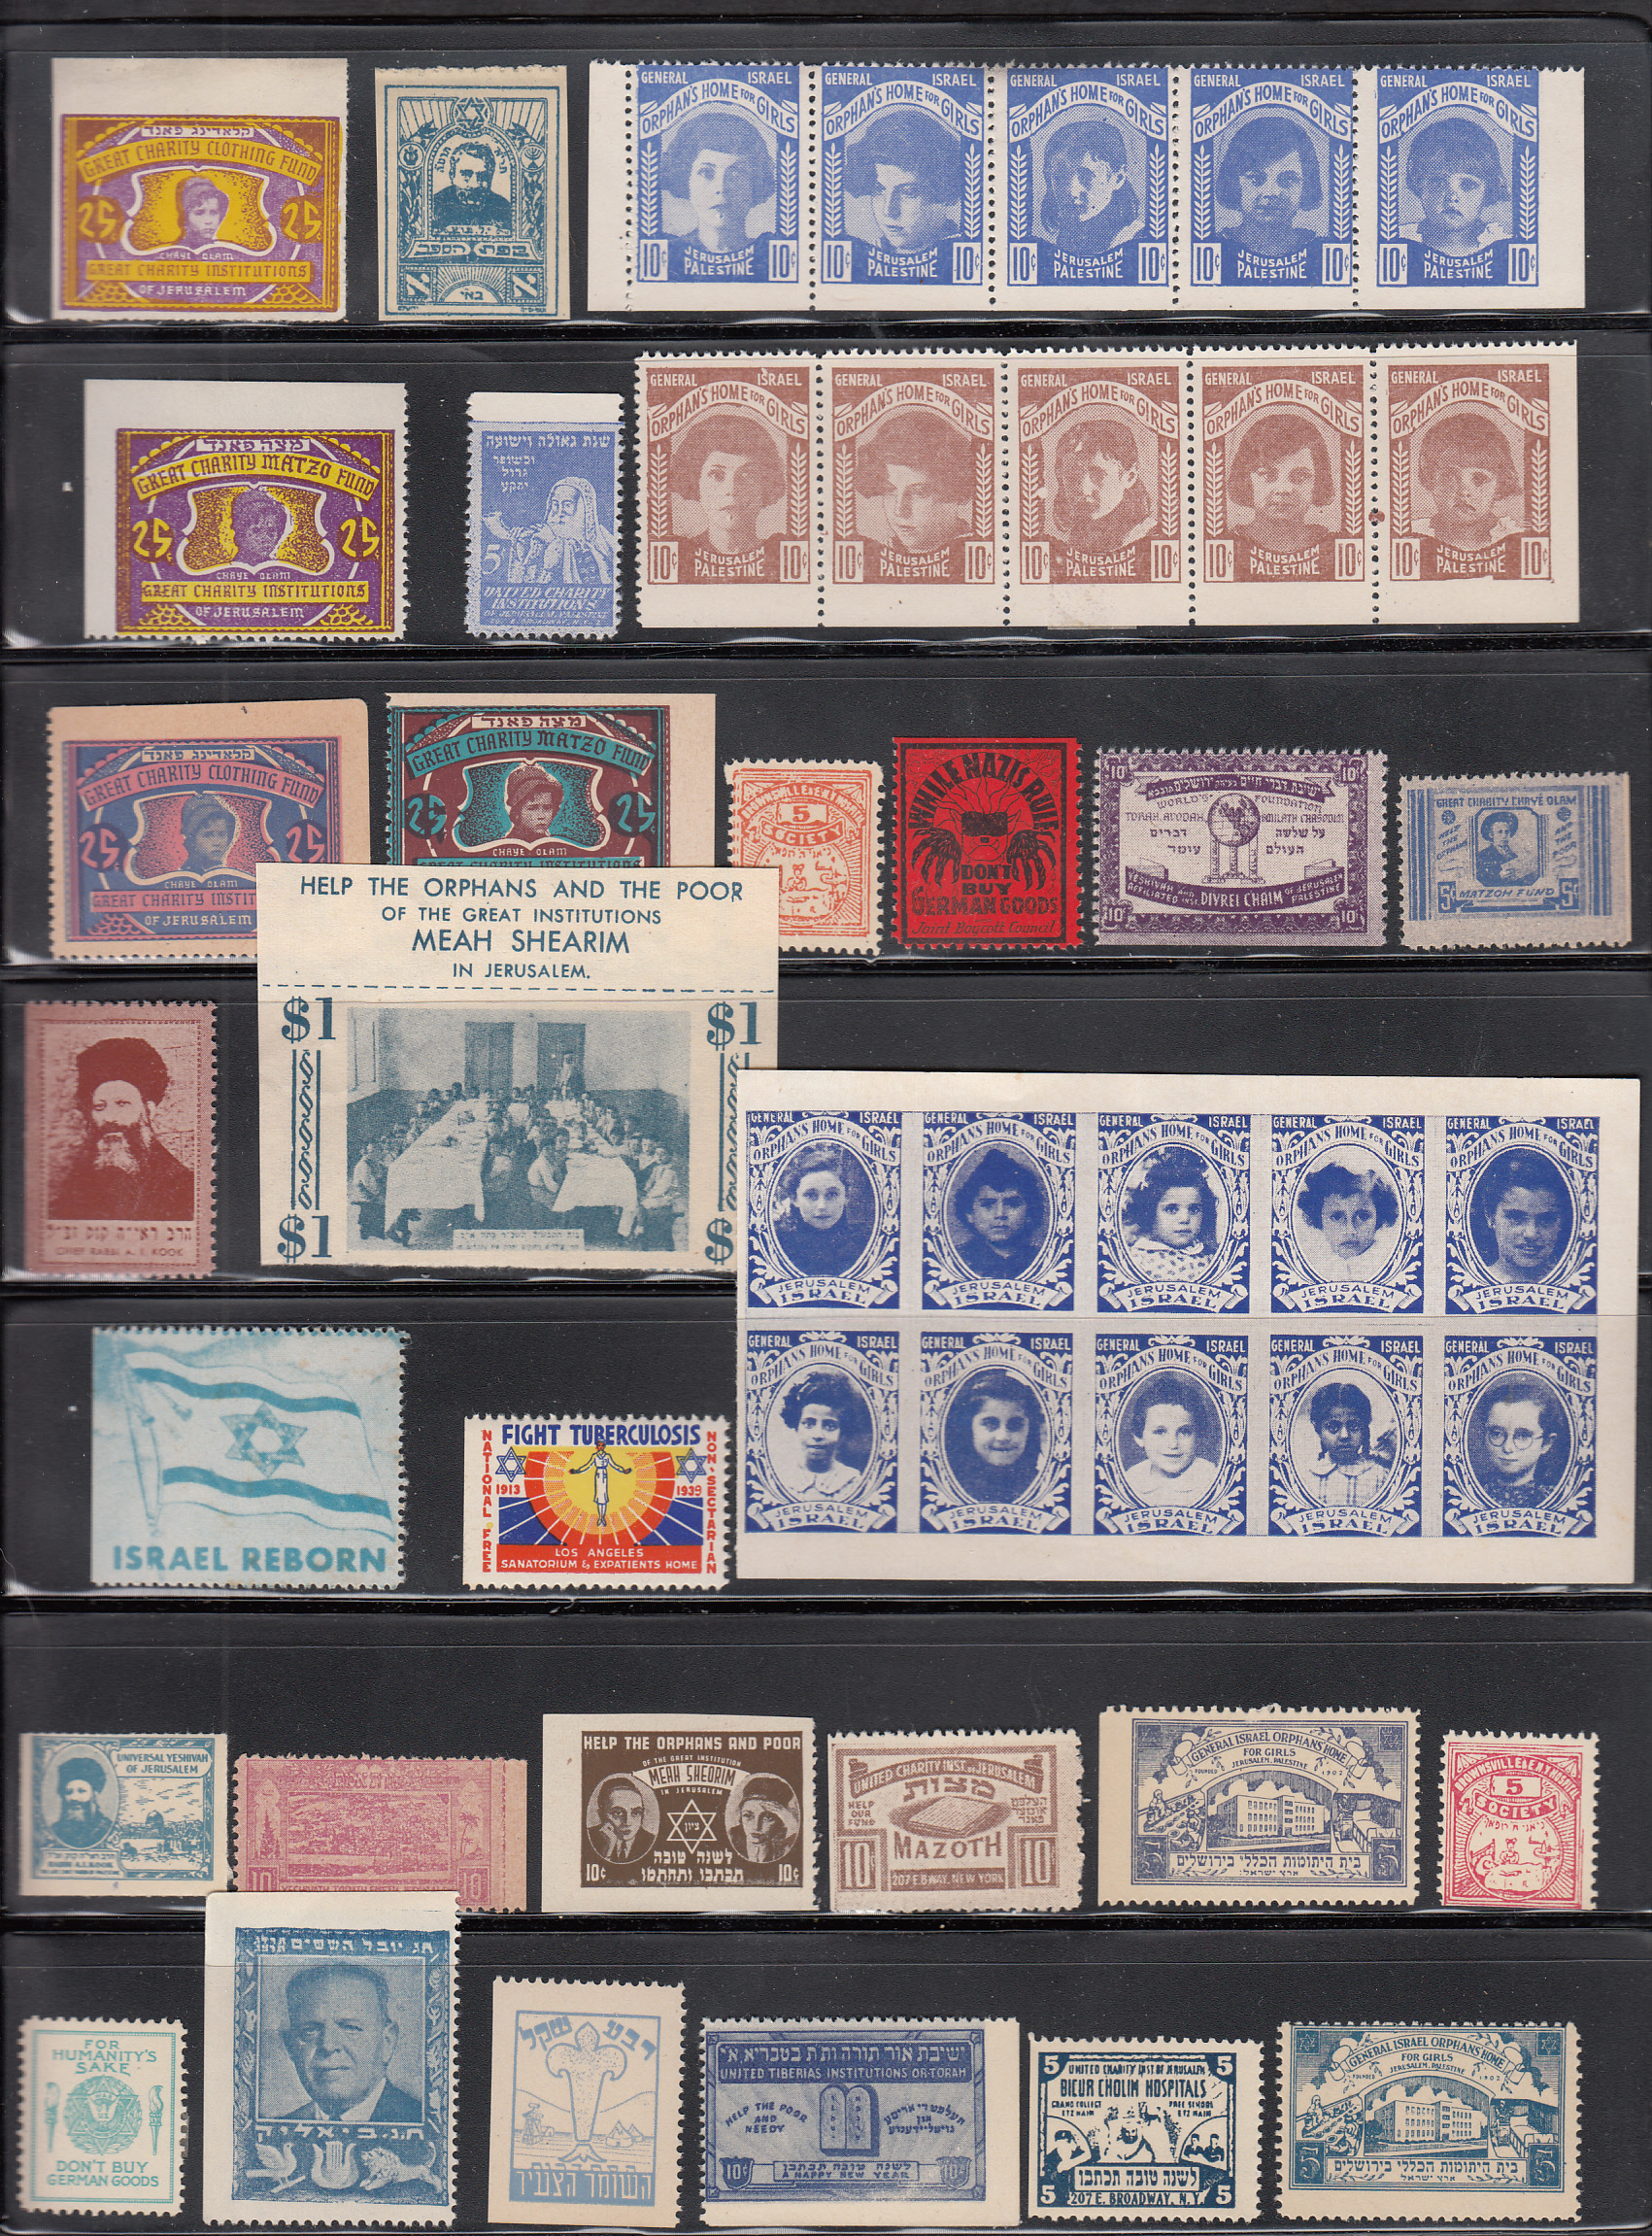 Lot 318 - Judaica, Holocaust, Anti Semitic, Autographs & related material  -  Doron Waide Mail Auction #40